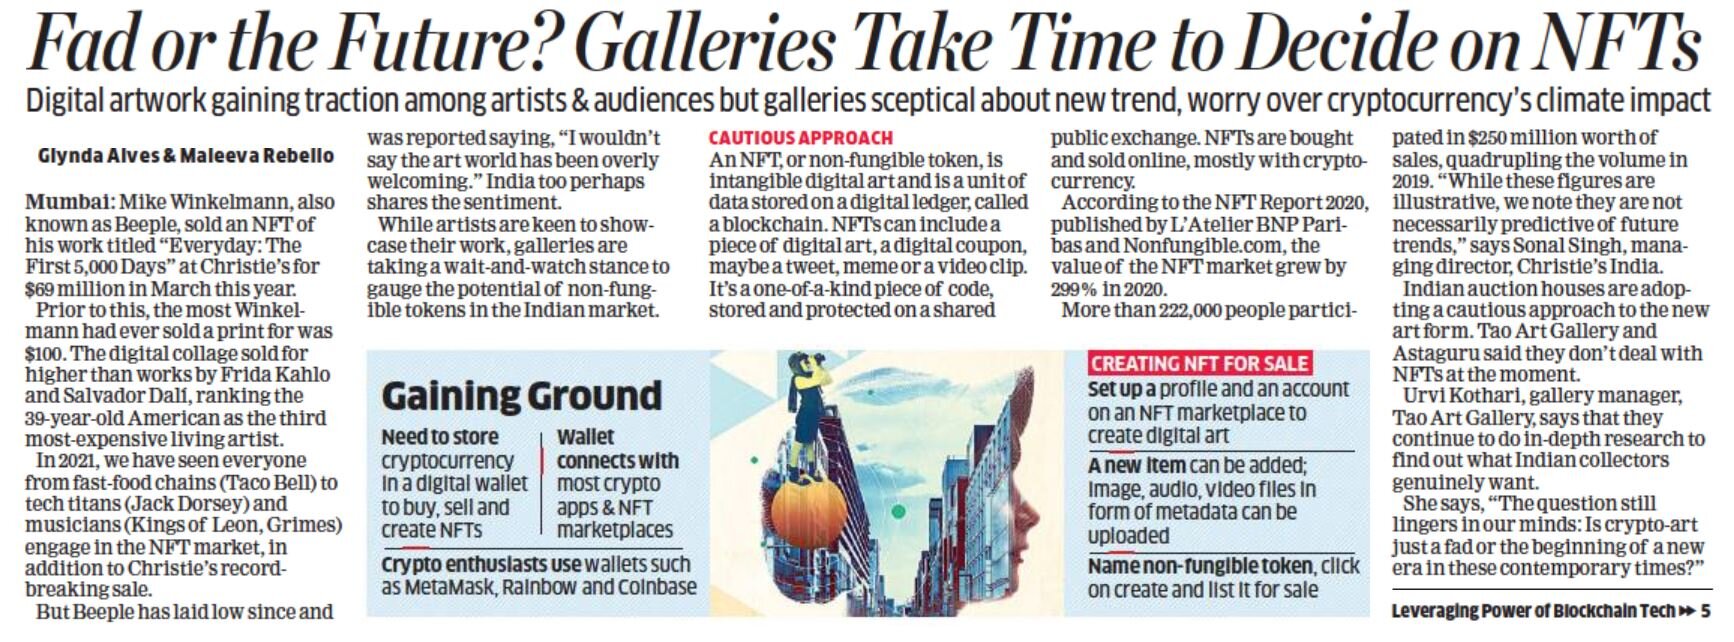 Future of NFTs - The Economic Times